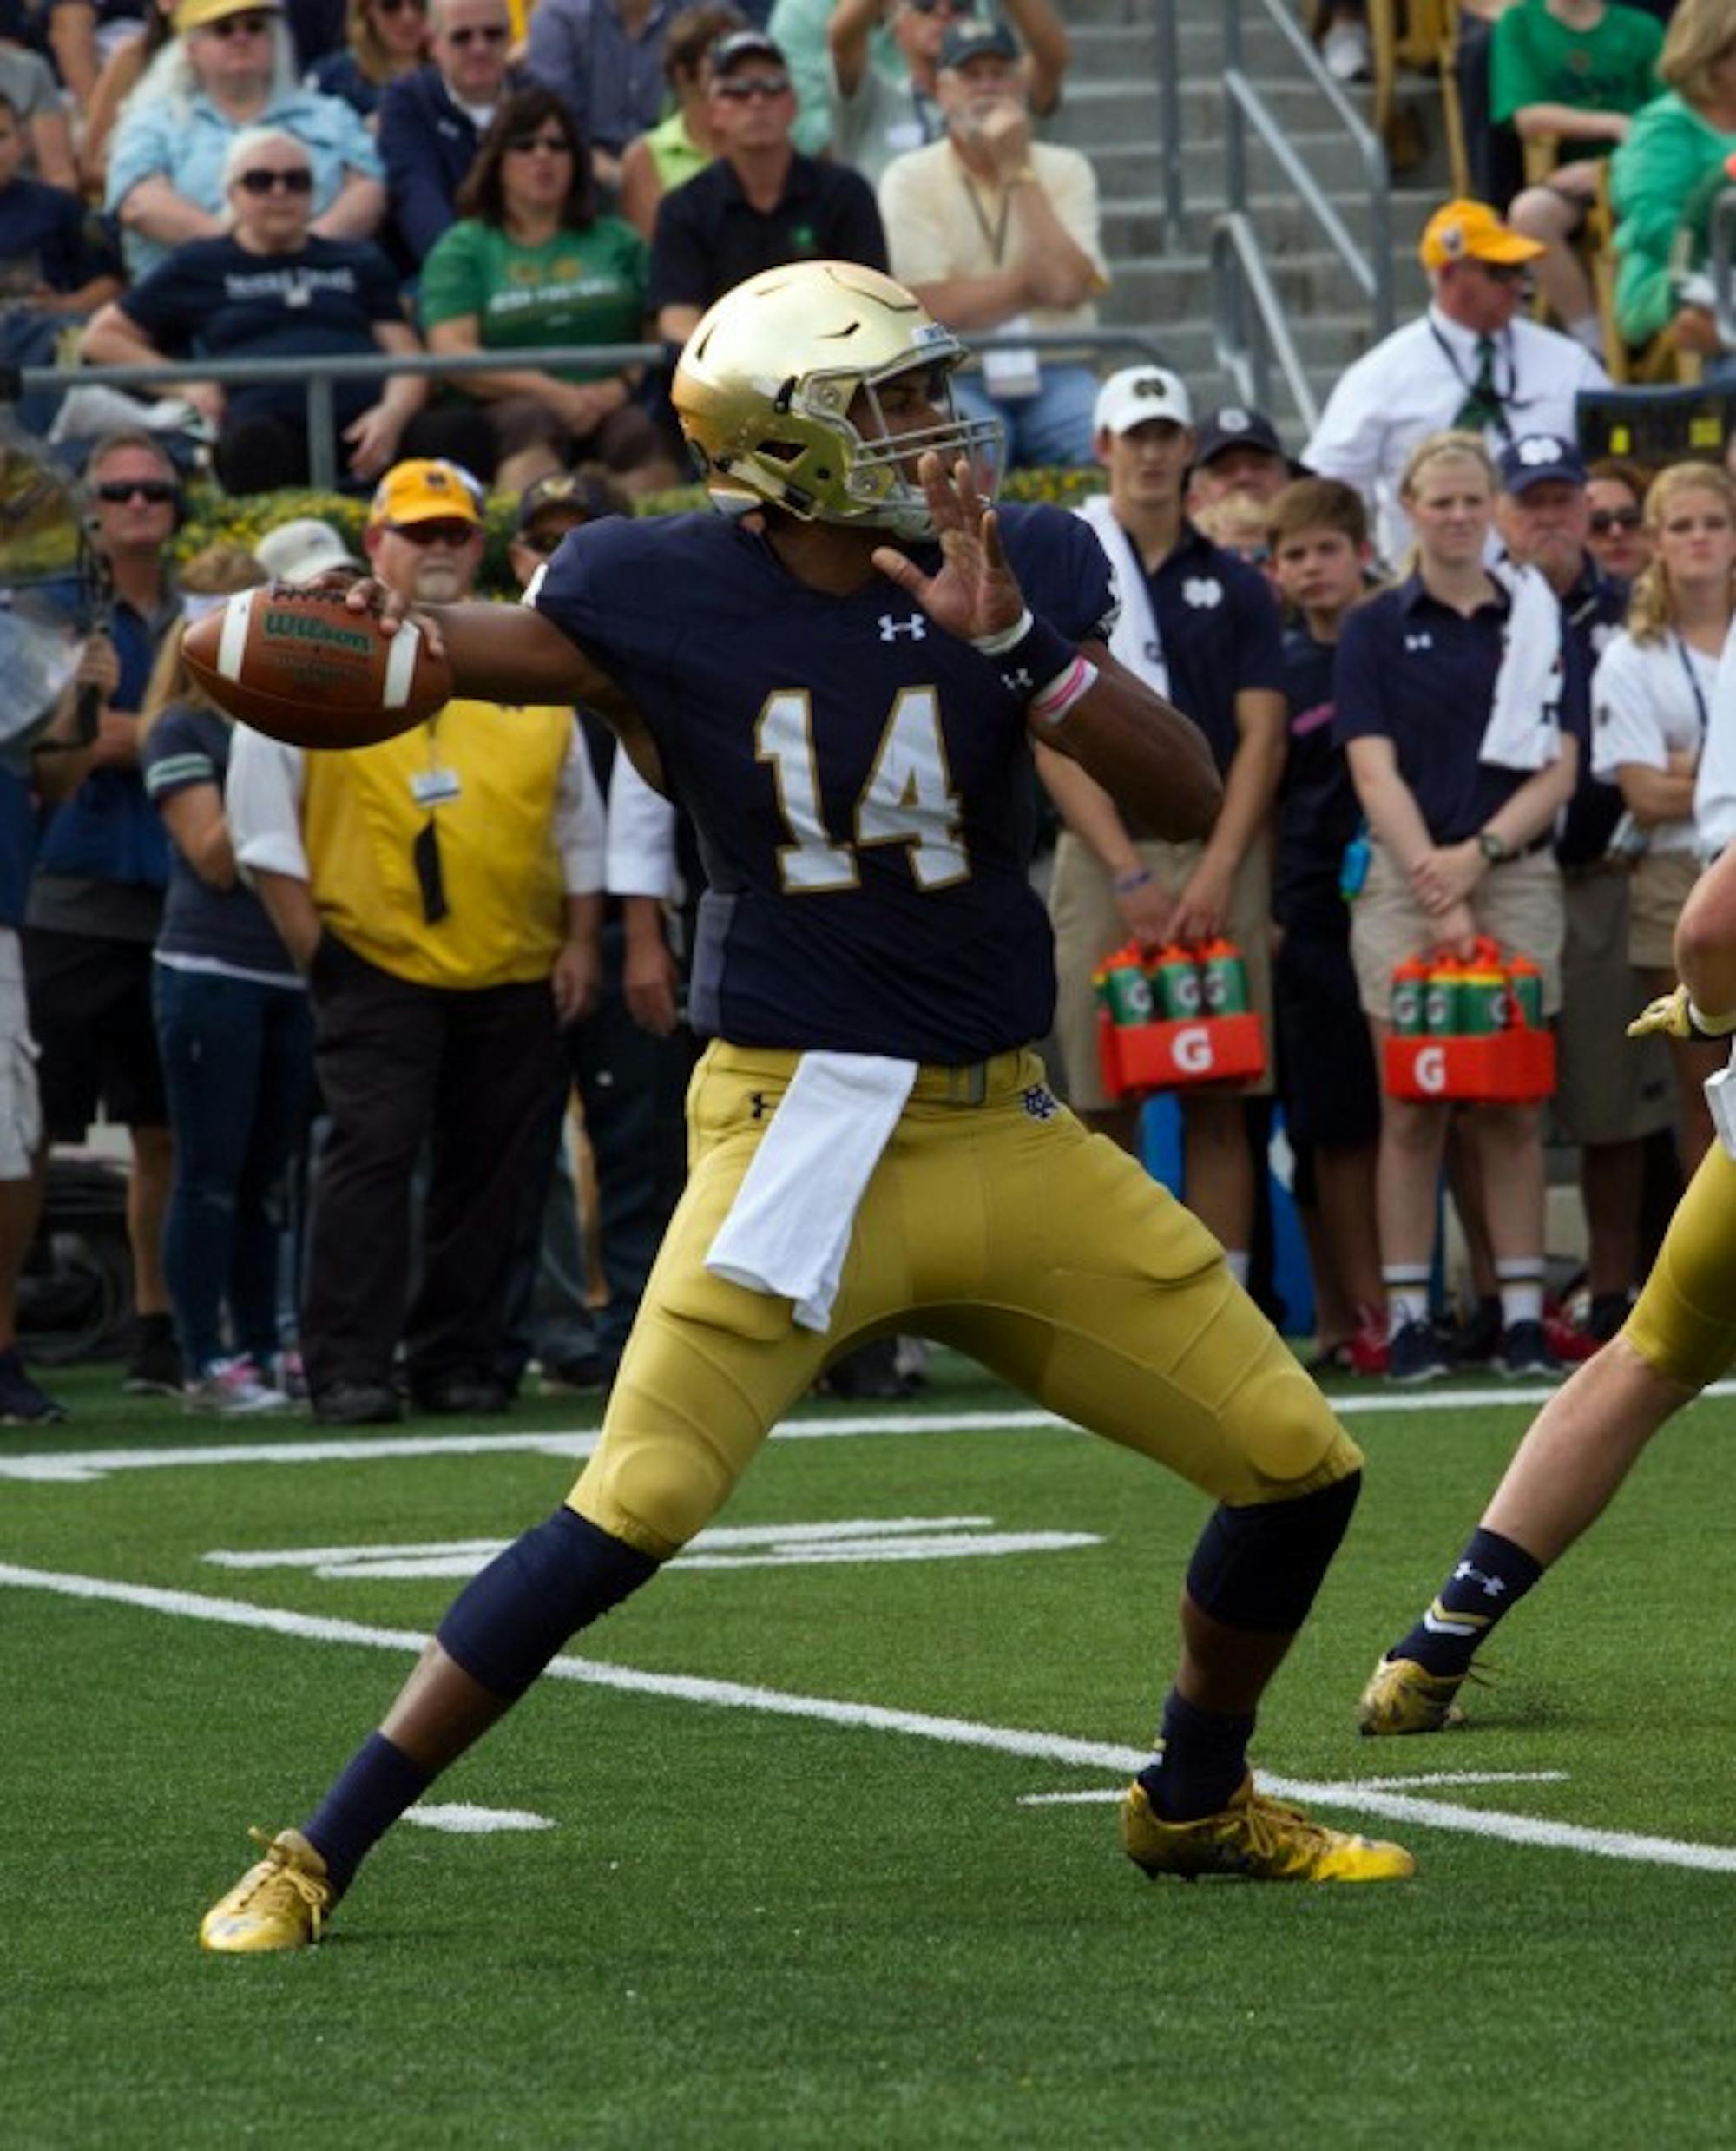 Irish sophomore quarterback DeShone Kizer winds up to throw during Notre Dame's 62-27 win over Massachusetts on Saturday at Notre Dame Stadium.